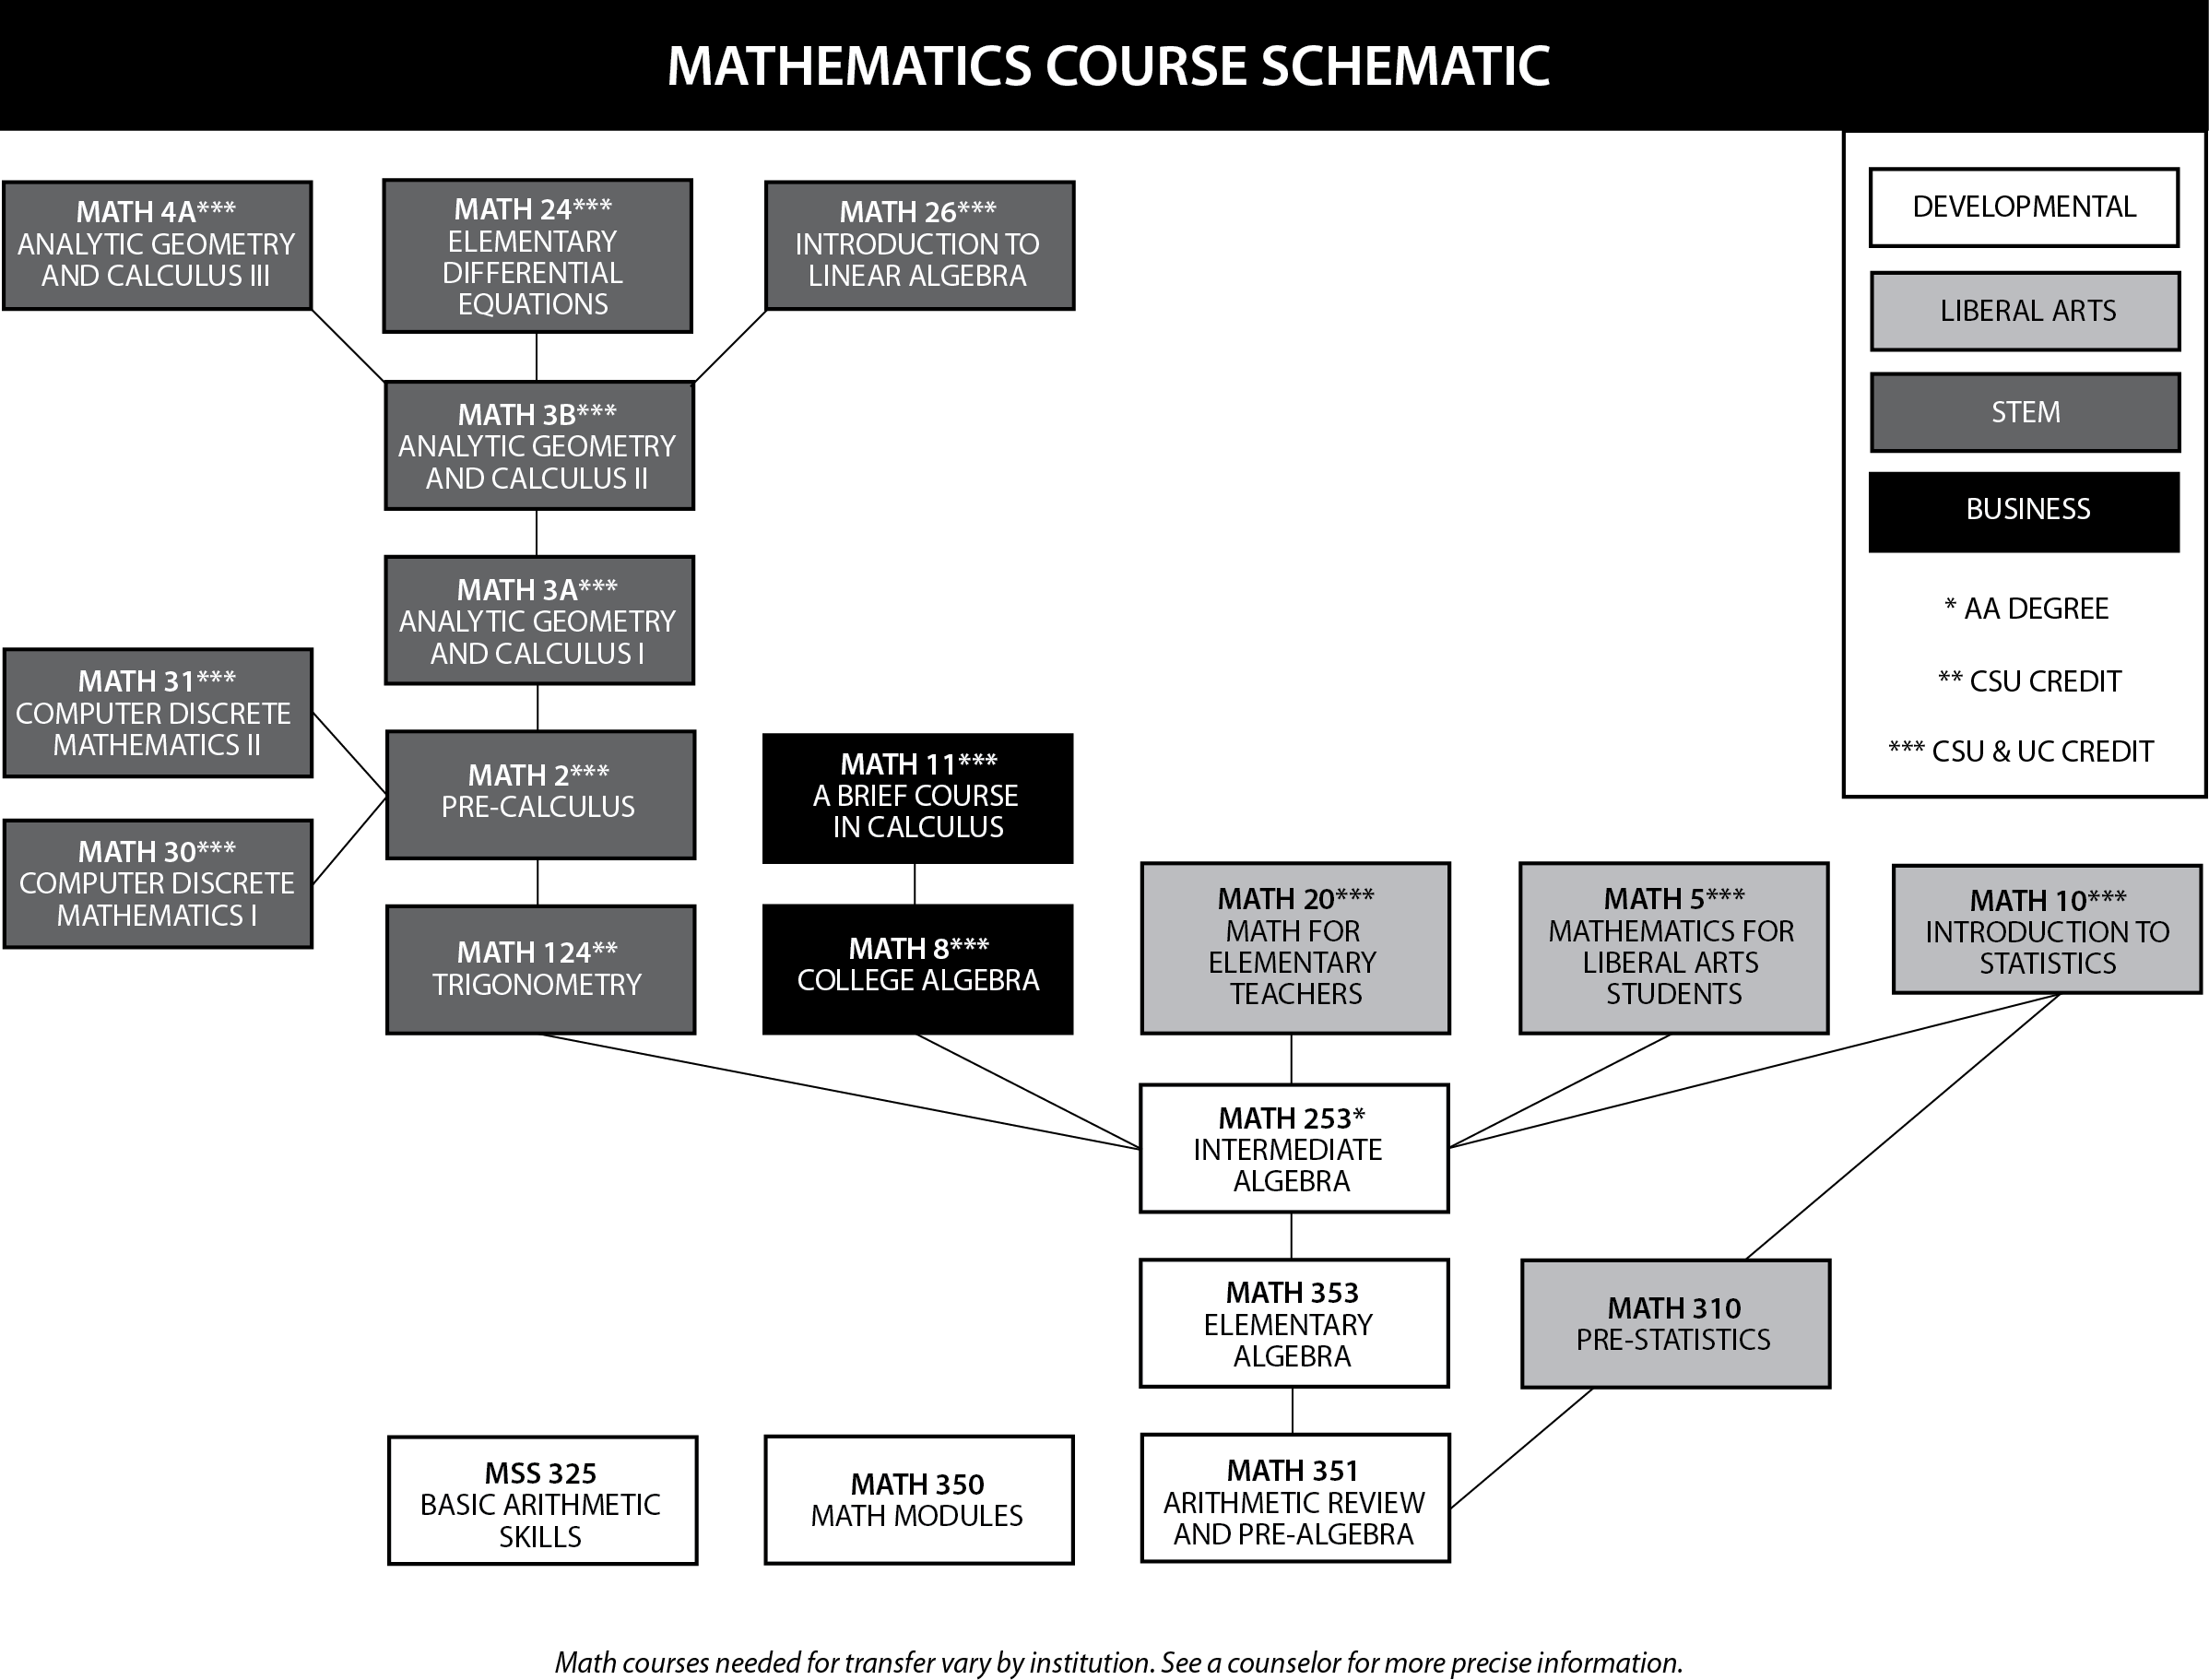 Graphical chart showing the mathematics course schematic. The chart shows the following: There are four developmental math courses. MSS 325, Basic Arithmetic Skills, and MATH 350, Math Modules, are standalone courses. MATH 351, Arithmetic Review and Pre-Algebra, leads to MATH 310, Pre-Statistics, which leads to MATH 10, Introduction to Statistics. MATH 351 also leads to MATH 353, Elementary Algebra, which leads to MATH 253, Intermediate Algebra. From MATH 253, students may take MATH 10; MATH 5, Mathematics for Liberal Arts Students; MATH 20, Math for Elementary Teachers. MATH 310, MATH 10, MATH 5 and MATH 20 are all liberal arts math courses. MATH 253 also leads to MATH 8, College Algebra, which leads to MATH 11, A Brief Course in Calculus. MATH 8 and MATH 11 are business math courses. MATH 253 also leads to MATH 124, Trigonometry. MATH 124 leads to MATH 2, Pre-Calculus, which leads to both MATH 30, Computer Discrete Mathematics 1, and MATH 31, Computer Discrete Mathematics 2. MATH 2 also leads to MATH 3A, Analytic Geometry and Calculus 1, which leads to MATH 3B, Analytic Geometry and Calculus 2. MATH 3B leads to MATH 4A, Analytic Geometry and Calculus 3, or to MATH 24, Elementary Differential Equations, or MATH 26, Introduction to Linear Algebra. MATH 124, MATH 2, MATH 30, MATH 31, MATH 3A, MATH 3B, MATH 4A, MATH 24 and MATH 26 are all STEM courses. MATH 253 may be used for AA degree credit. MATH 124 may be used for CSU transfer articulation. The following courses may be used for CSU and UC transfer articulation: MATH 4A, MATH 24, MATH 26, MATH 3B, MATH 3A, MATH 2, MATH 31, MATH 30, MATH 11, MATH 8, MATH 20, MATH 5, and MATH 10. Math courses needed for transfer vary by institution. See a counselor for more precise information.